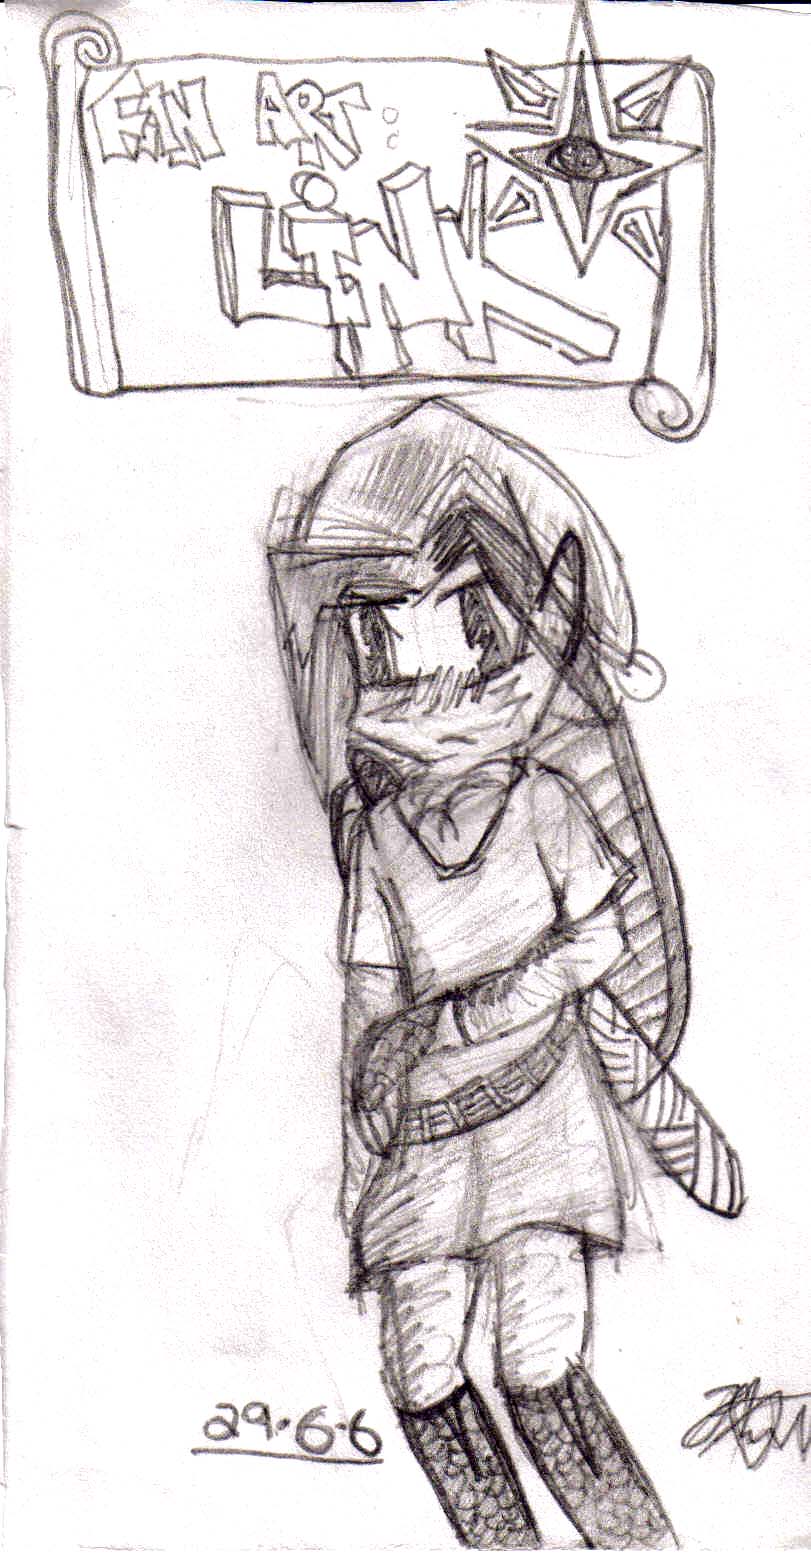 Pencilled, Un-inked Link by freakypickle